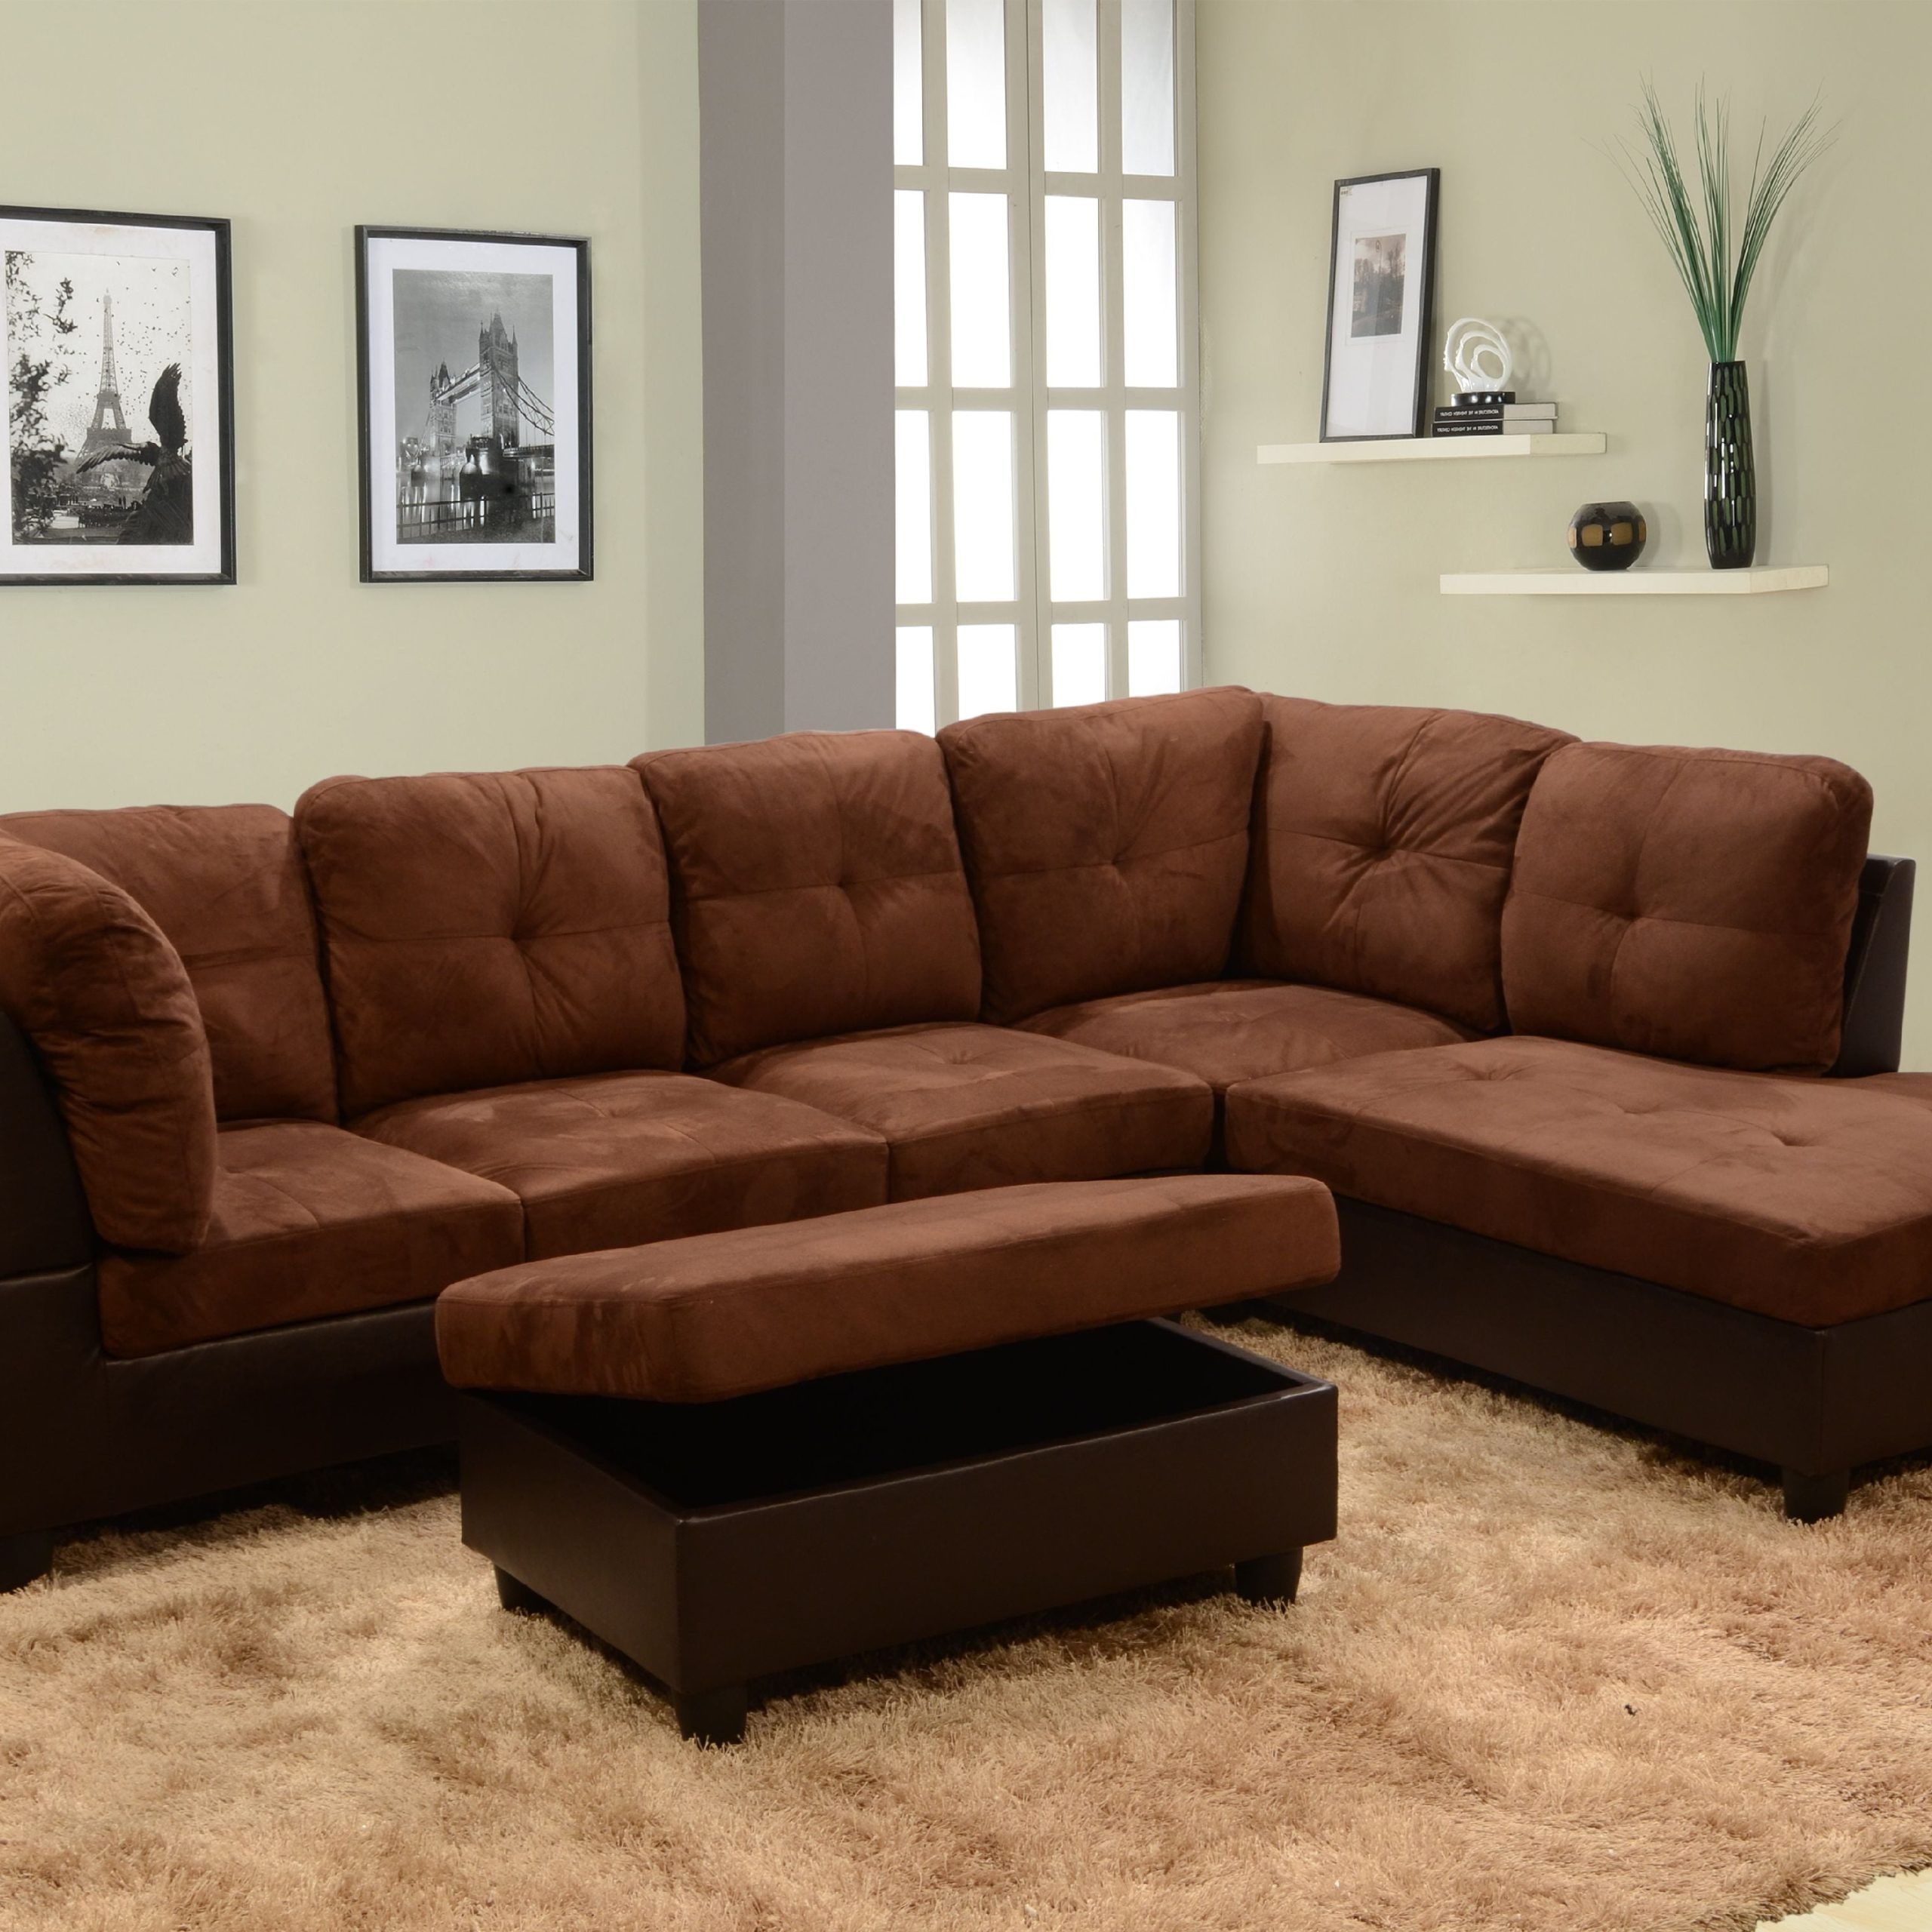 Matt Right Facing Sectional Sofa With Ottoman,chocolate – Walmart Regarding Sofas With Ottomans In Brown (View 5 of 20)